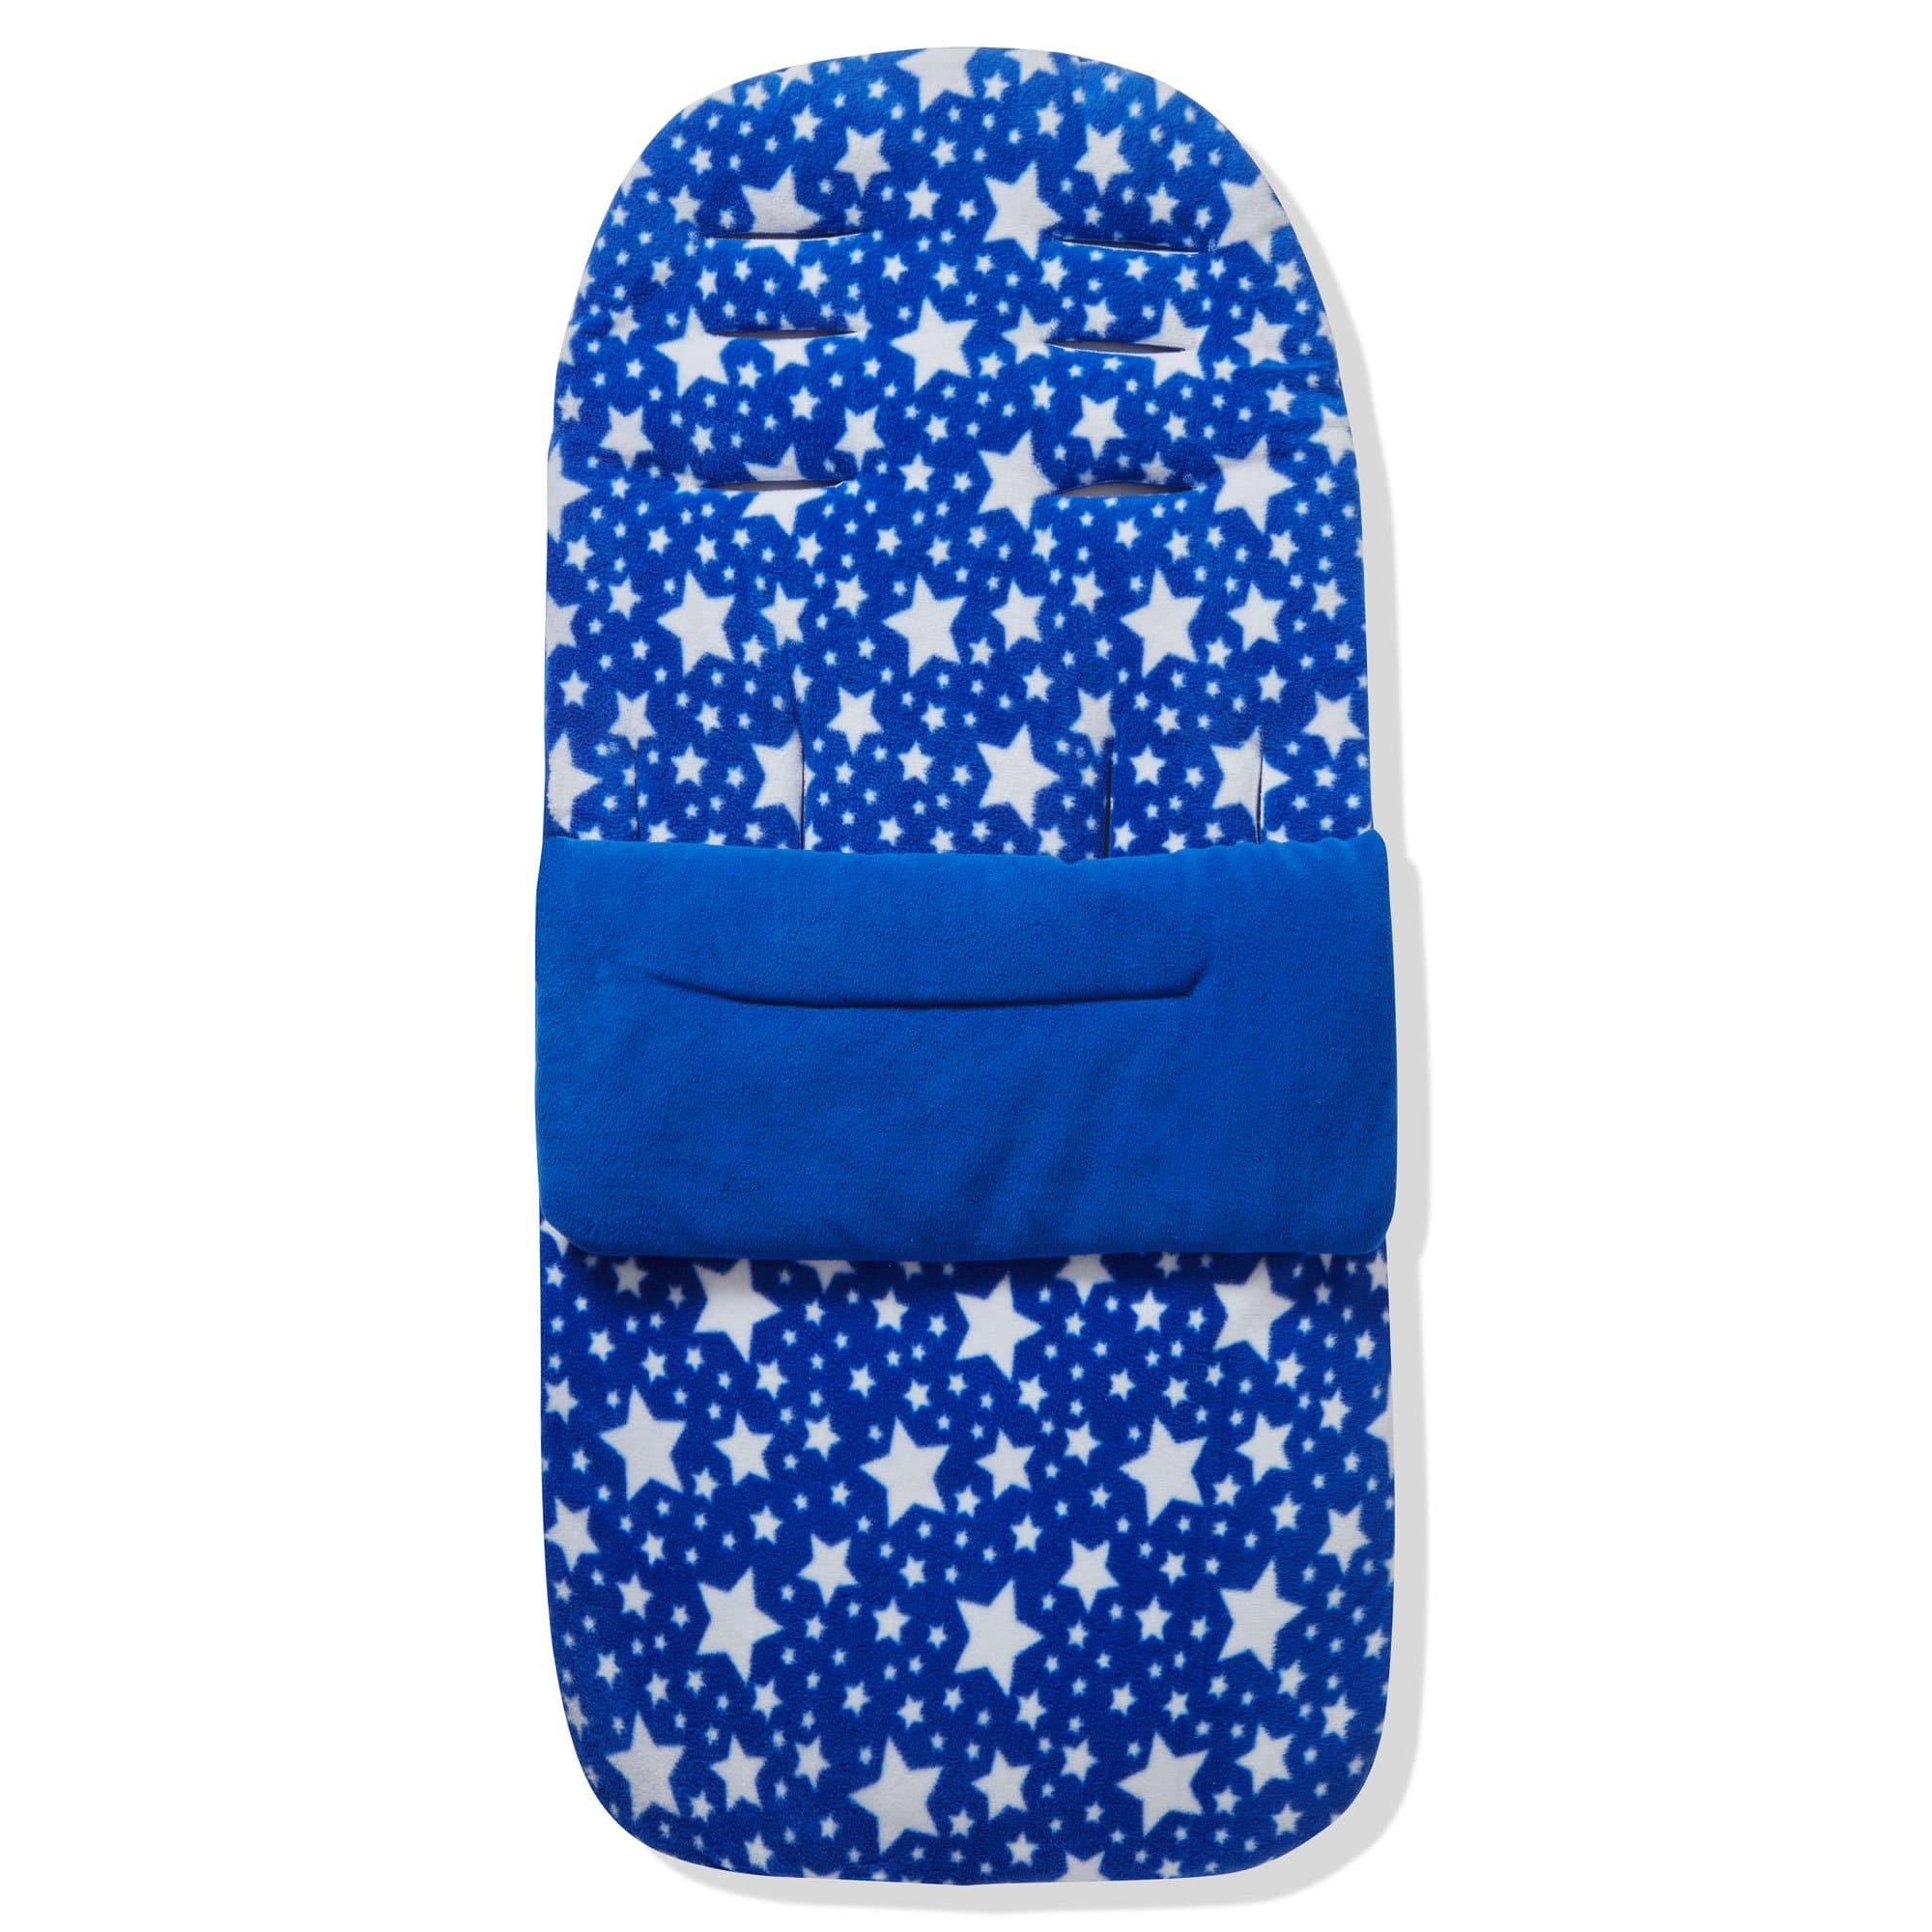 Universal Fleece Pushchair Footmuff / Cosy Toes - Fits All Pushchairs / Prams And Buggies - Blue Star / Fits All Models | For Your Little One